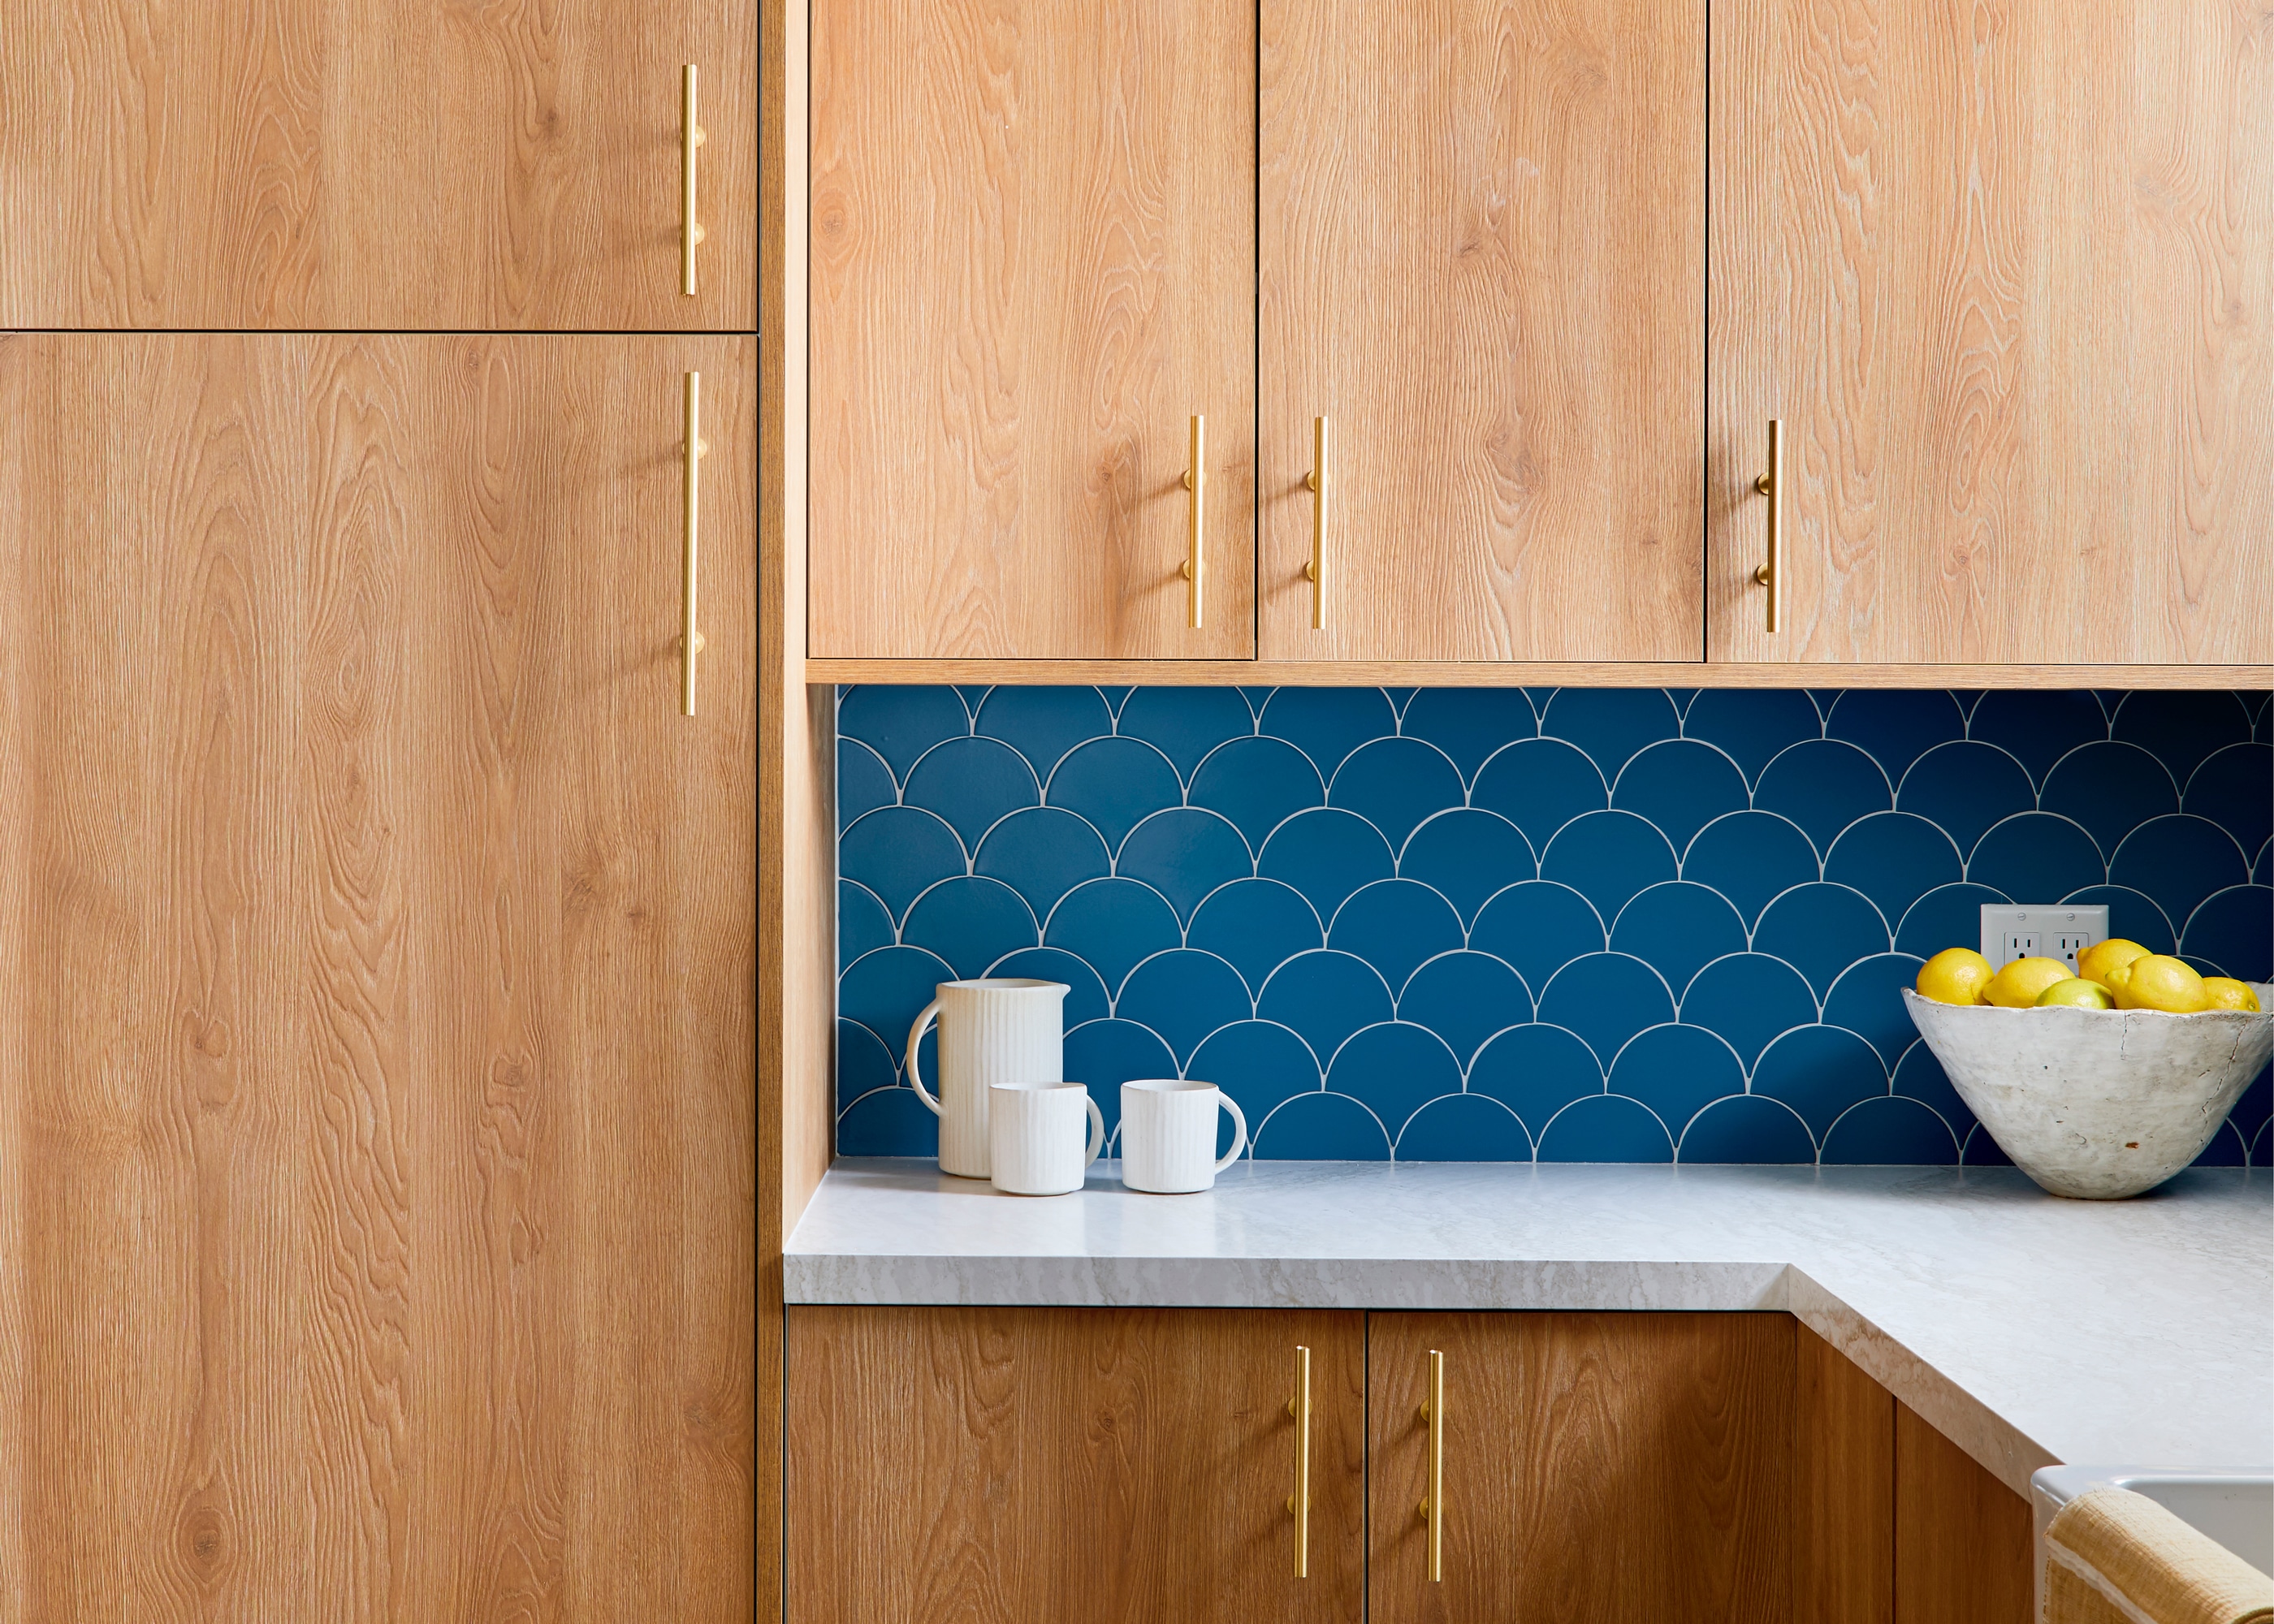 Wood kitchen cabinets with a blue backsplash and white countertops